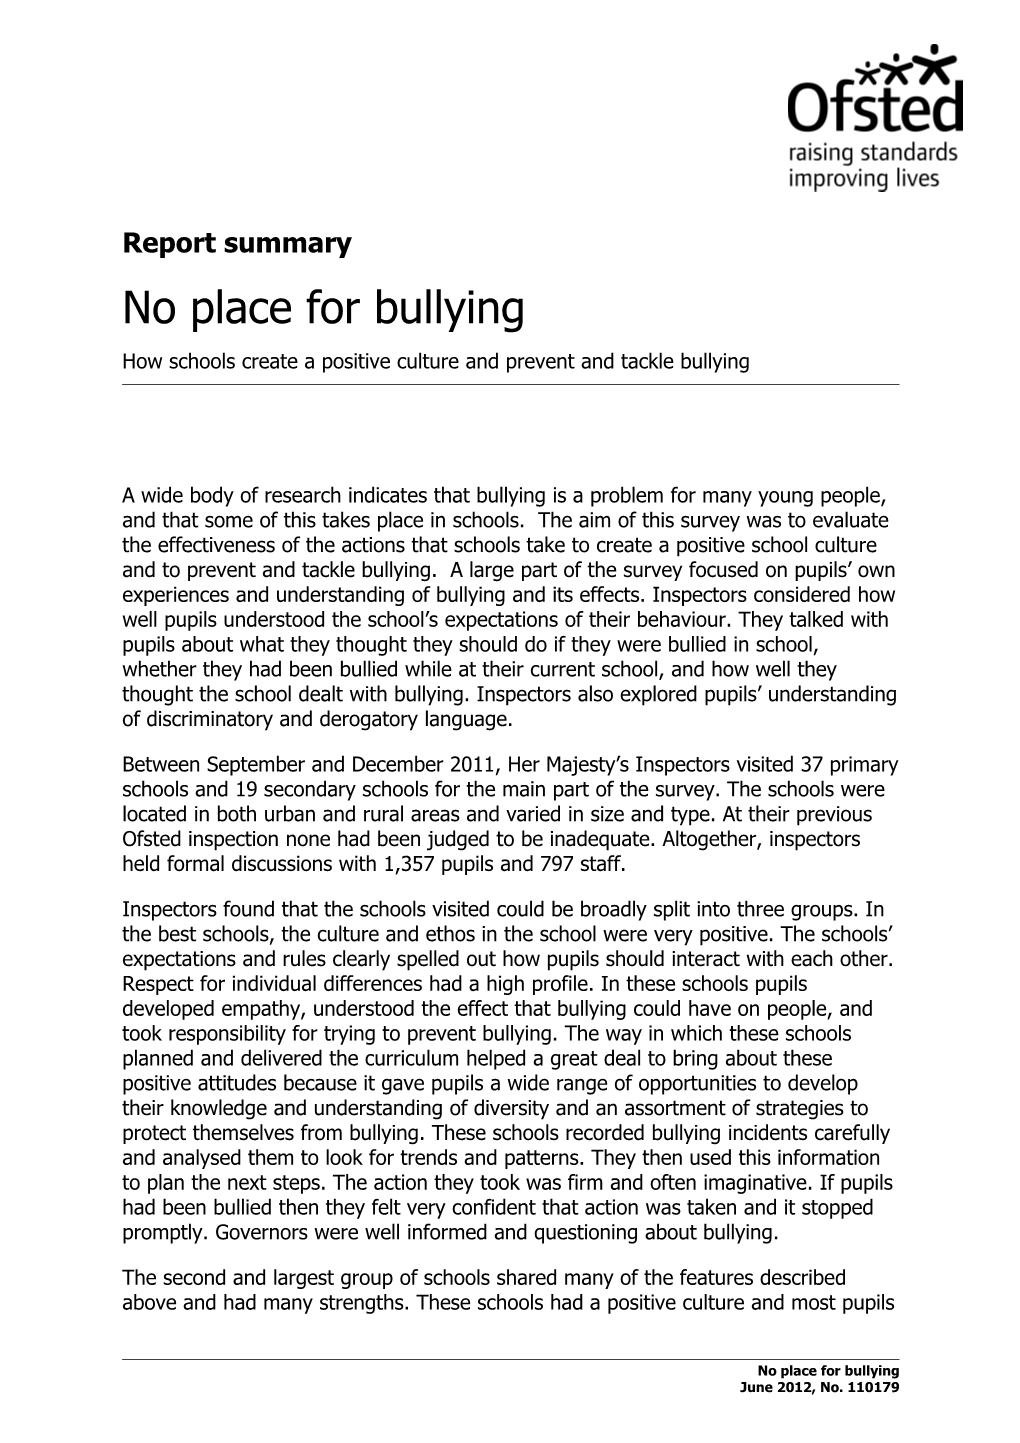 No Place for Bullying